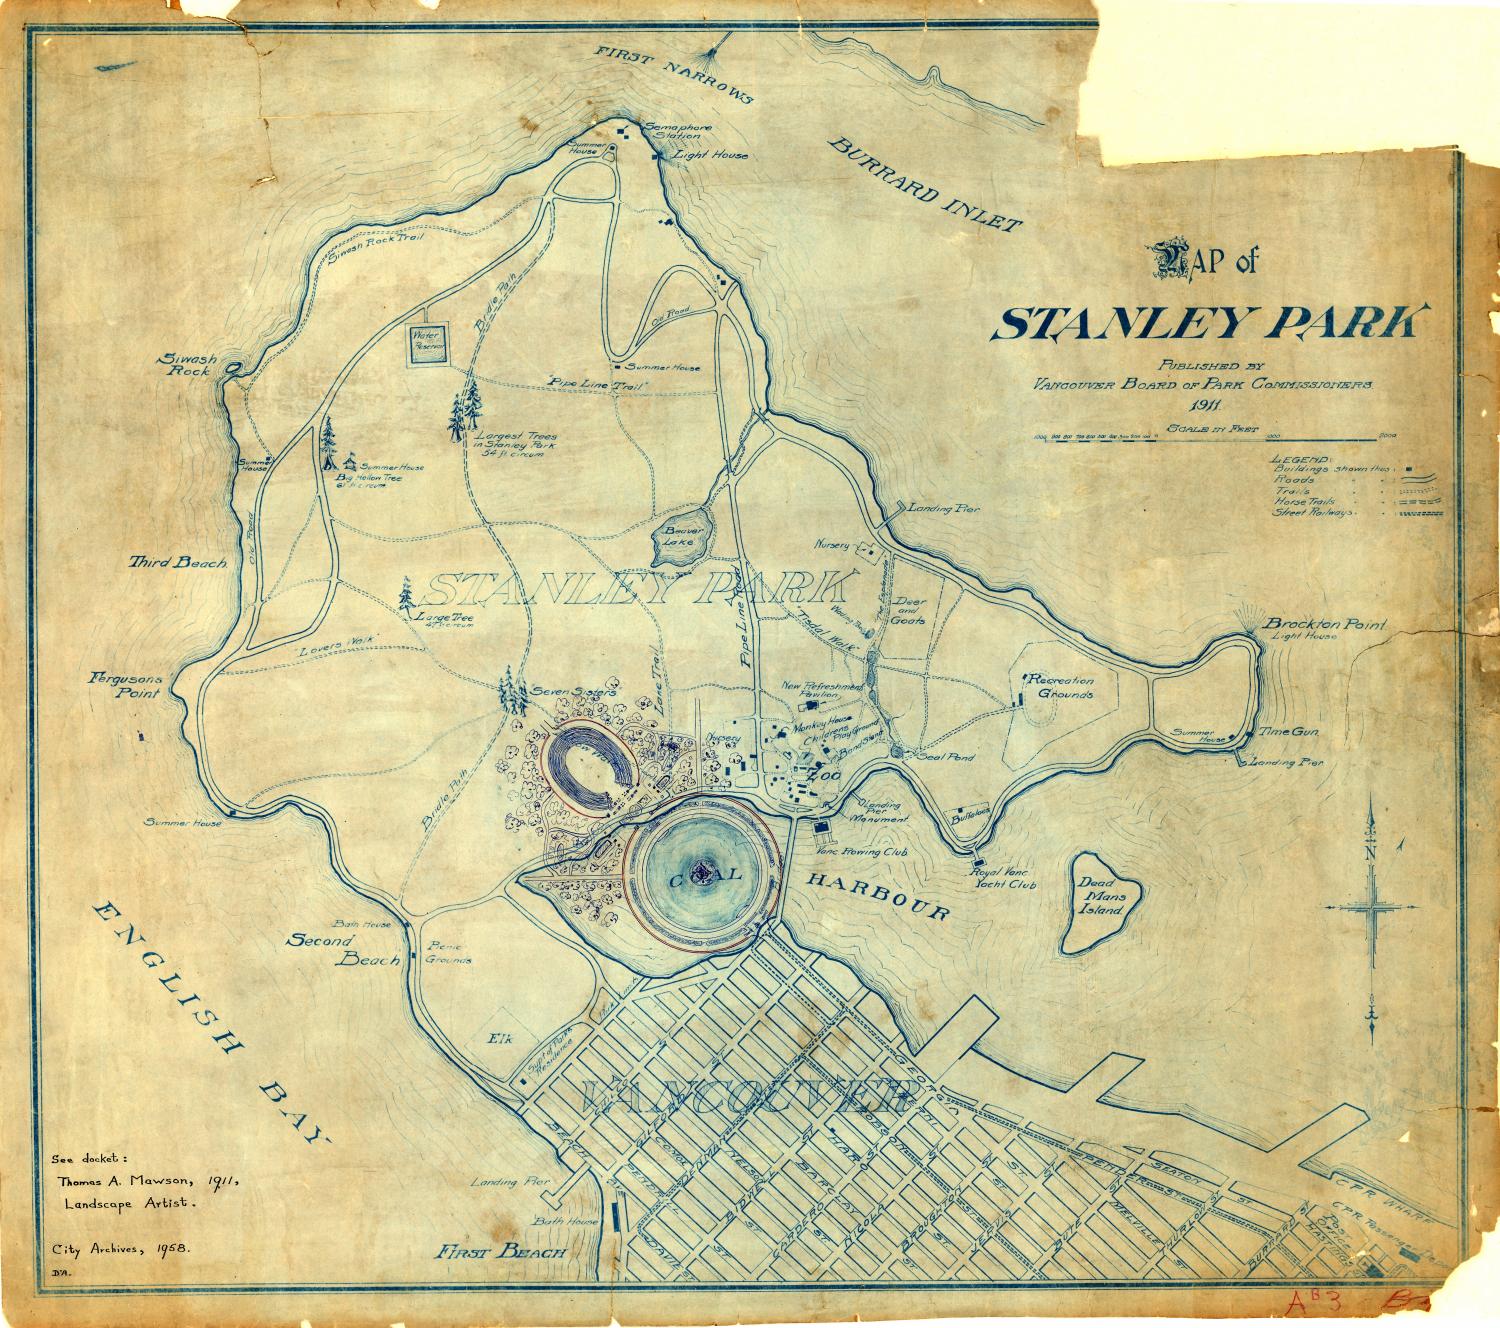 Published map of Stanley Park in 1911, which has been annotated to show a proposed redevelopment plan for the western portion of Coal Harbour (currently Lost Lagoon) and surrounding area.